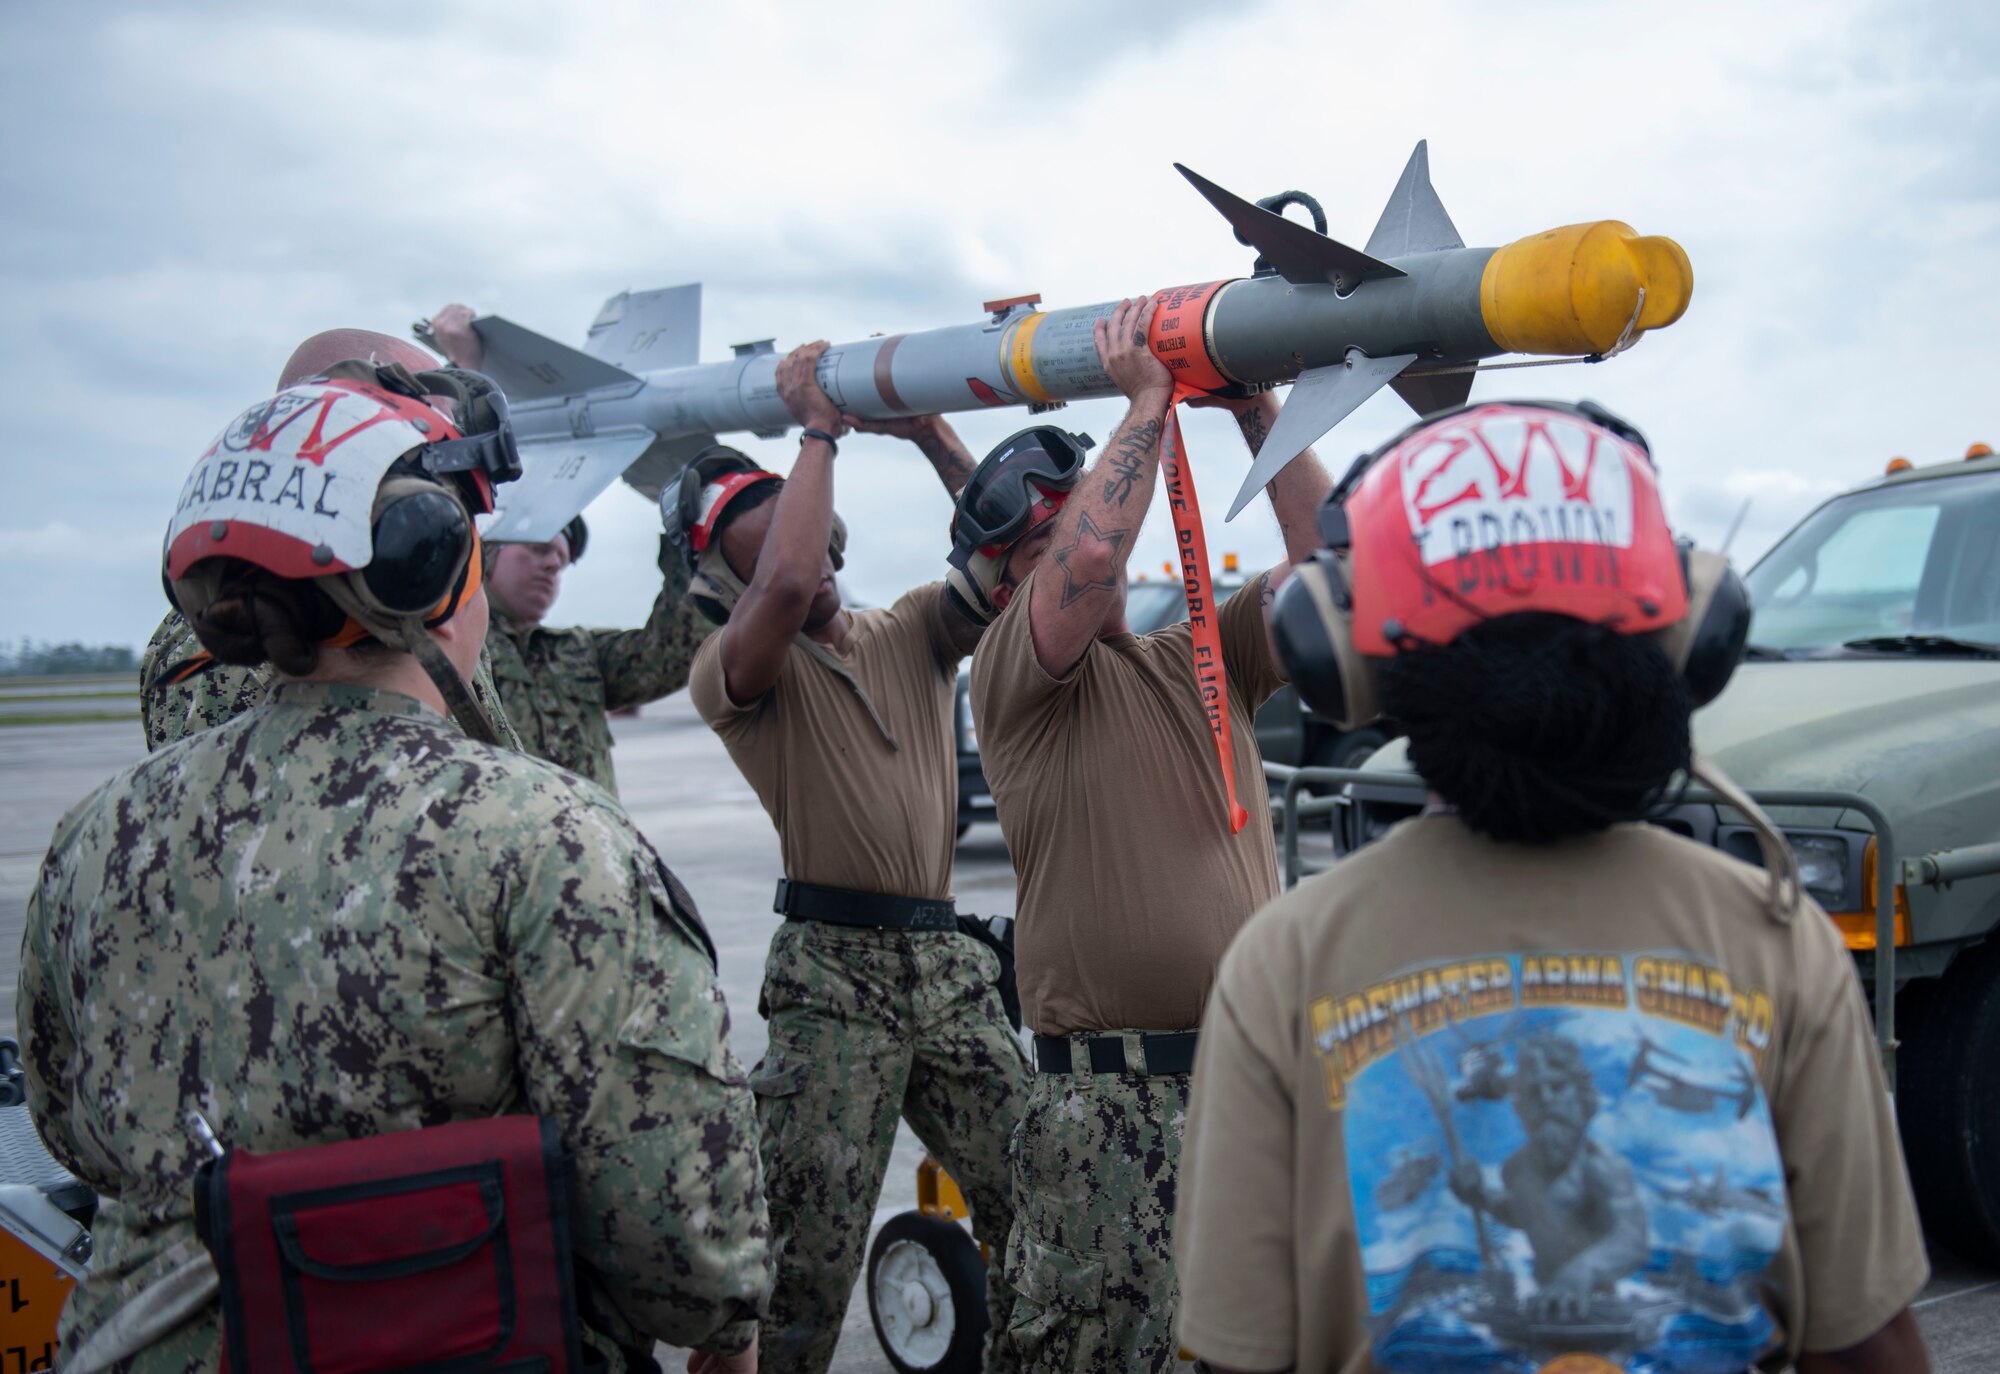 Men hold a missile over their heads